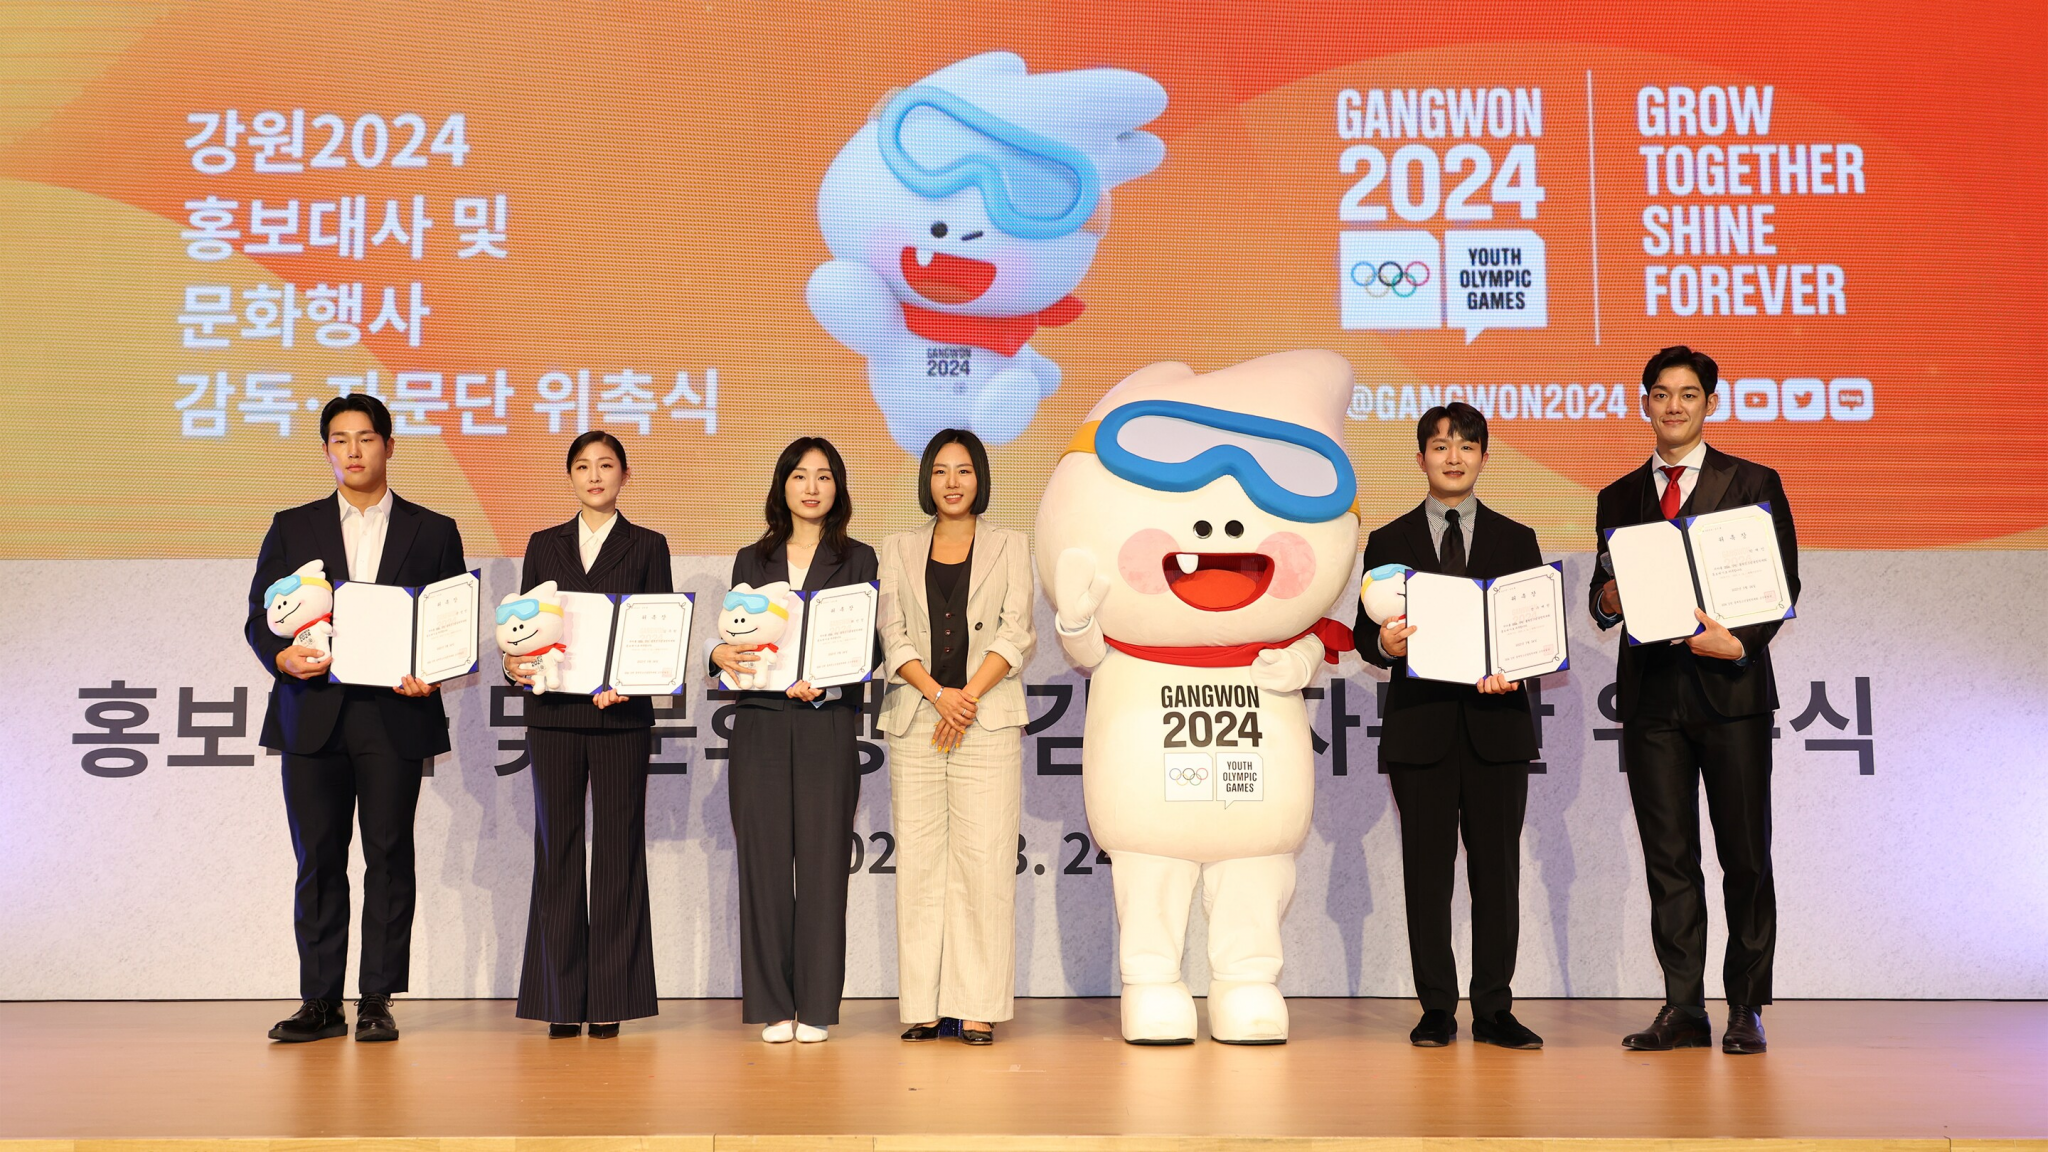 Five new Ambassadors have been announced as part of Gangwon 2024's 300 days to go celebrations ©Gangwon 2024